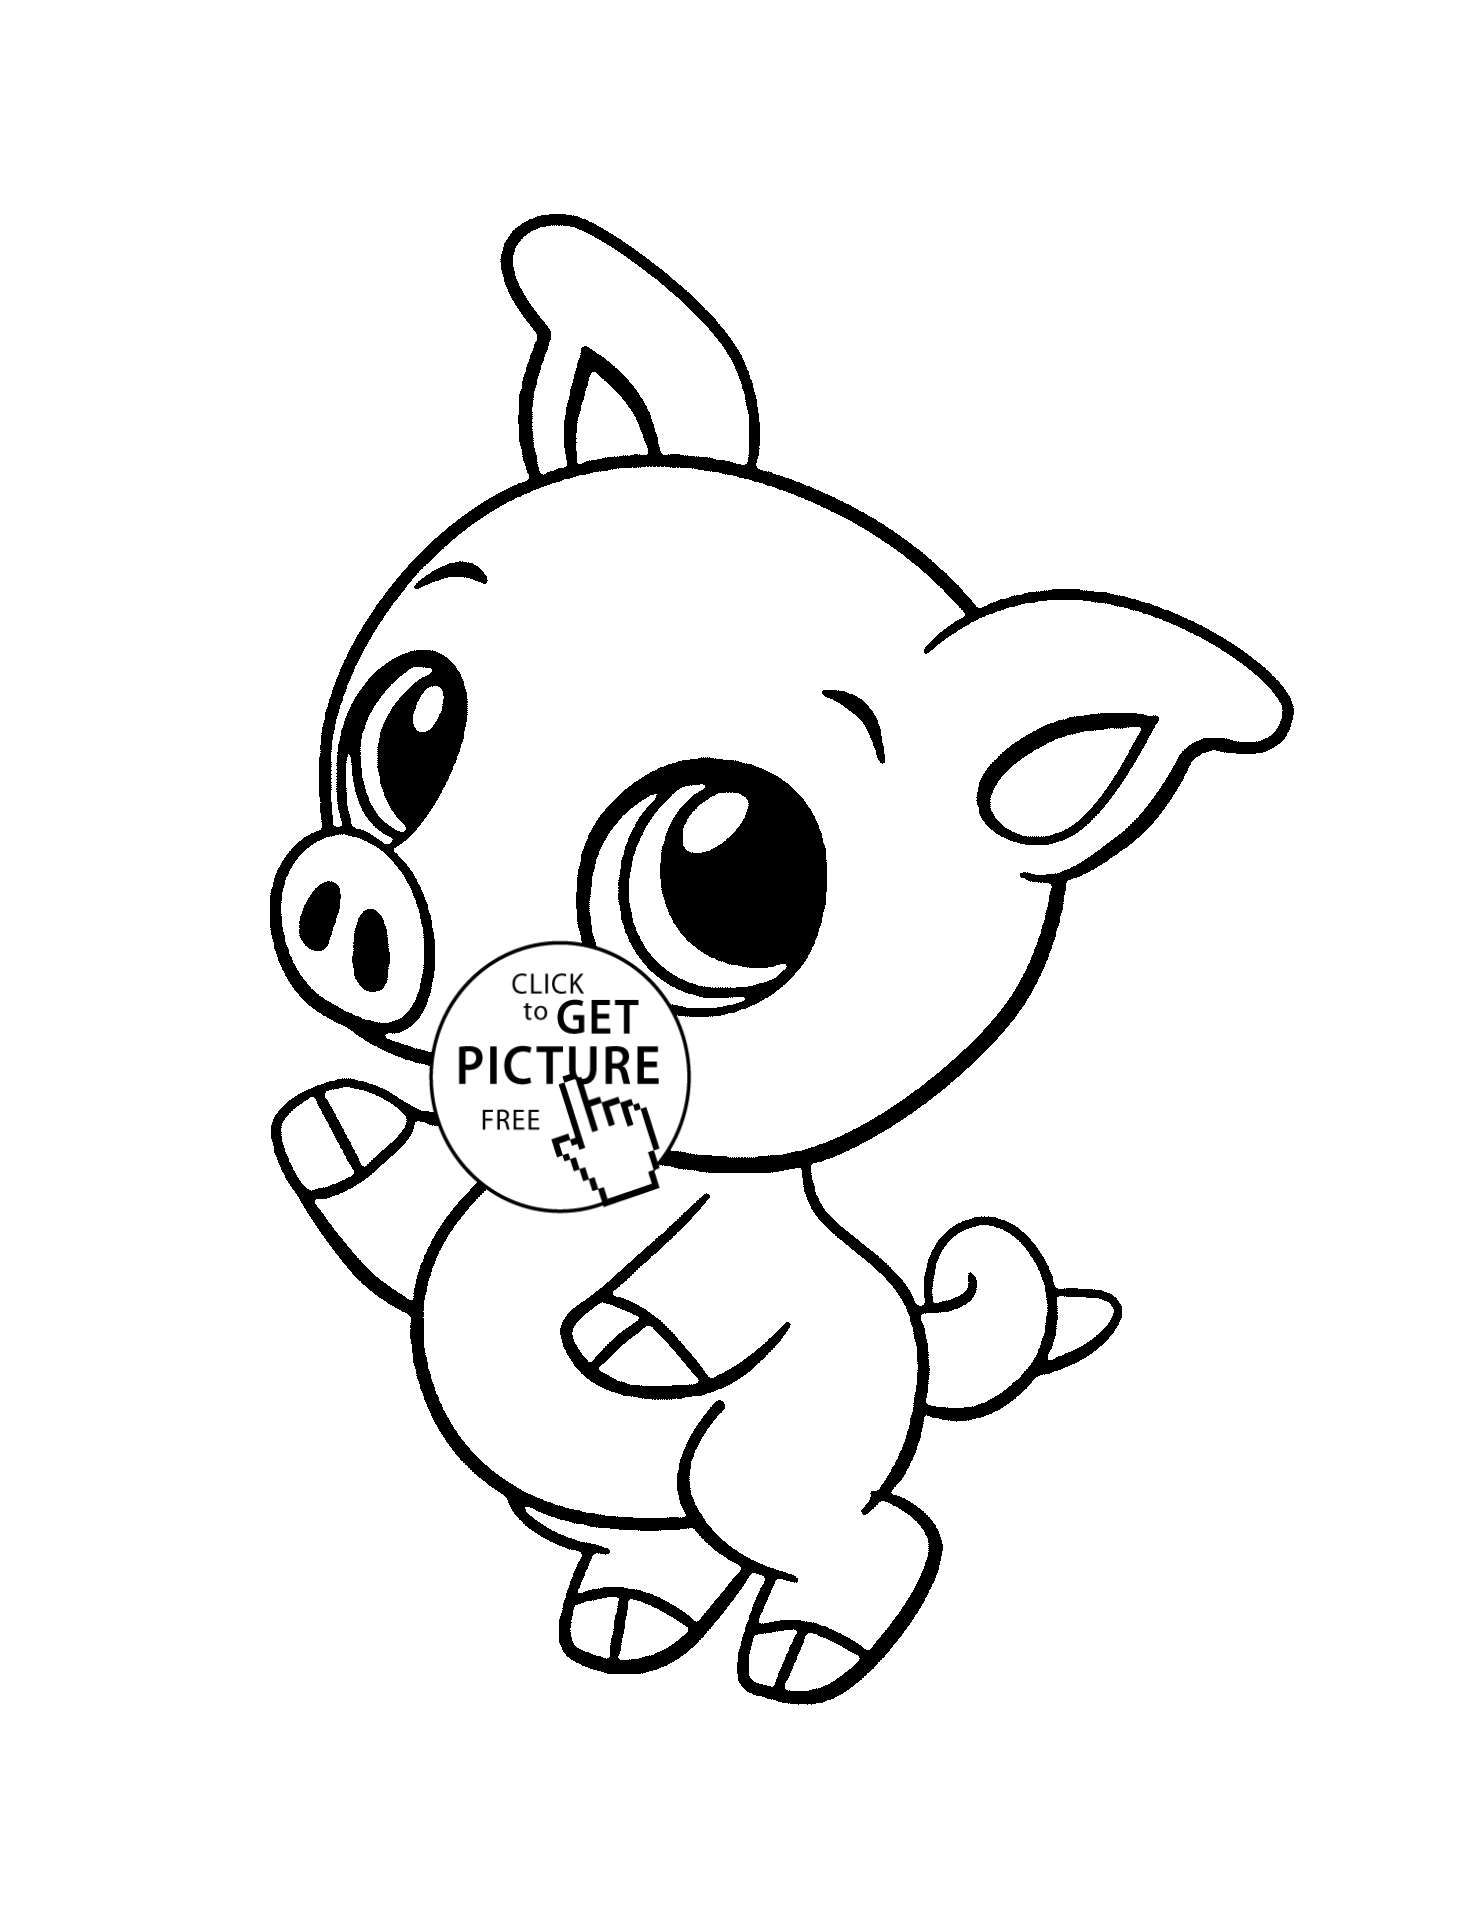 Baby Piggy Coloring Page - Coloring Pages For All Ages